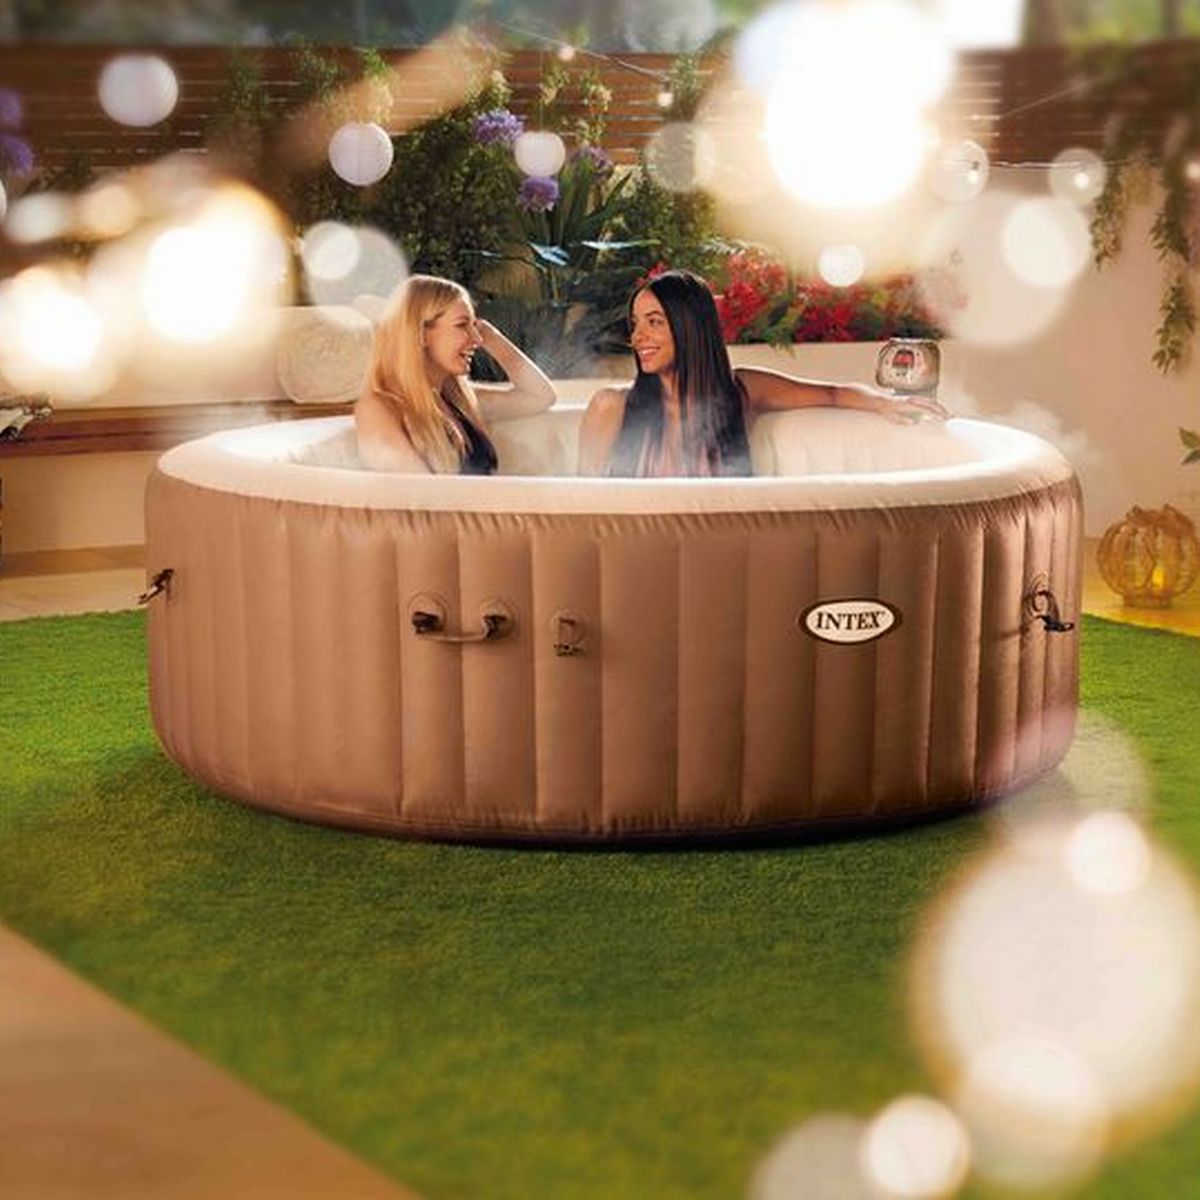 Aldi’s Inflatable Hot Tub Is Coming Back This Summer- Grab It Quickly